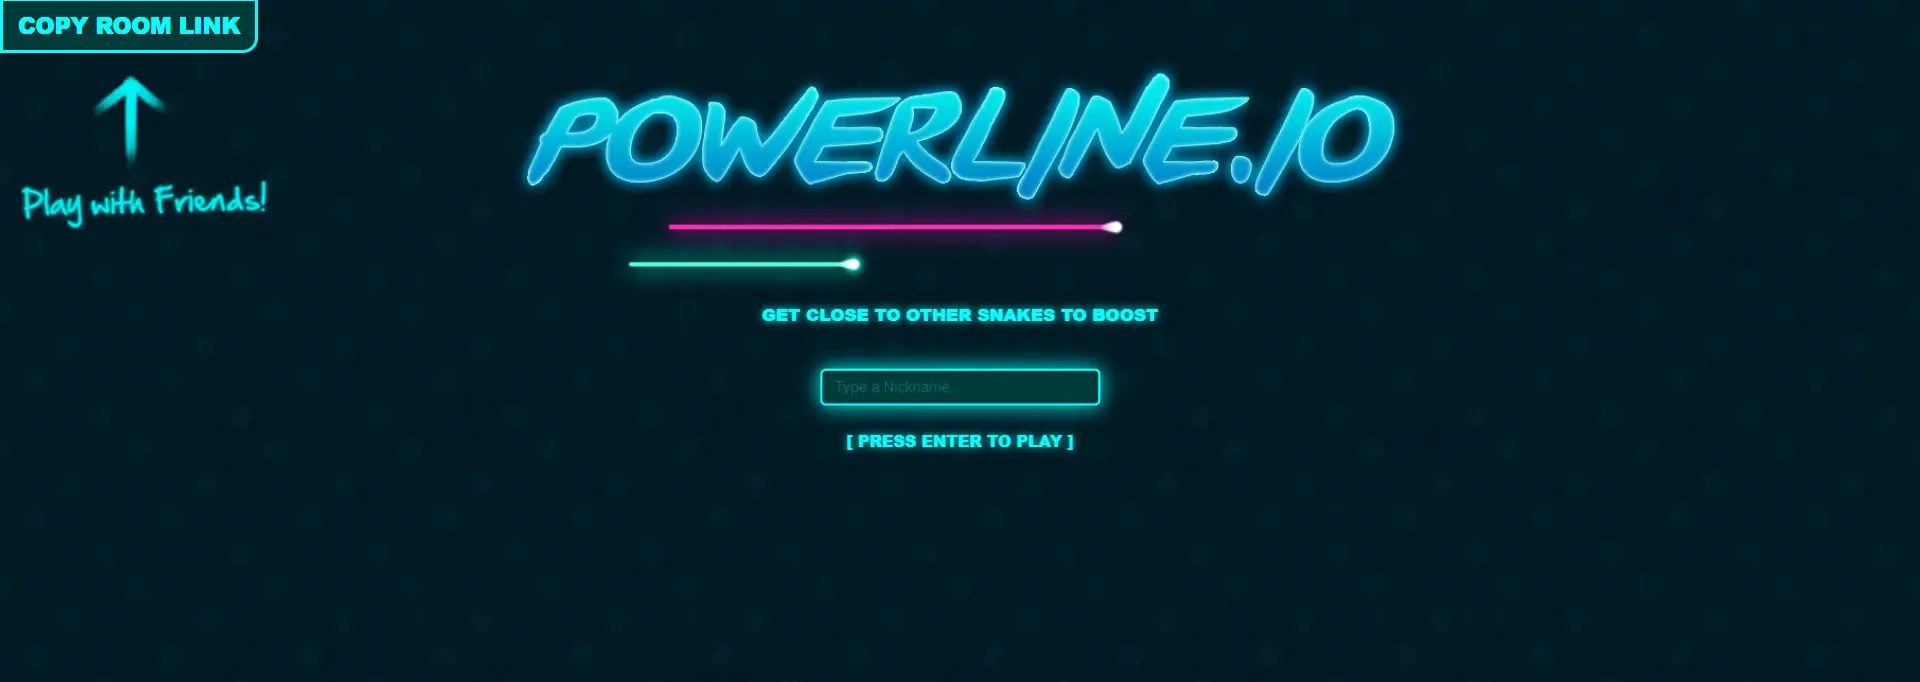 Powerline.io browser game